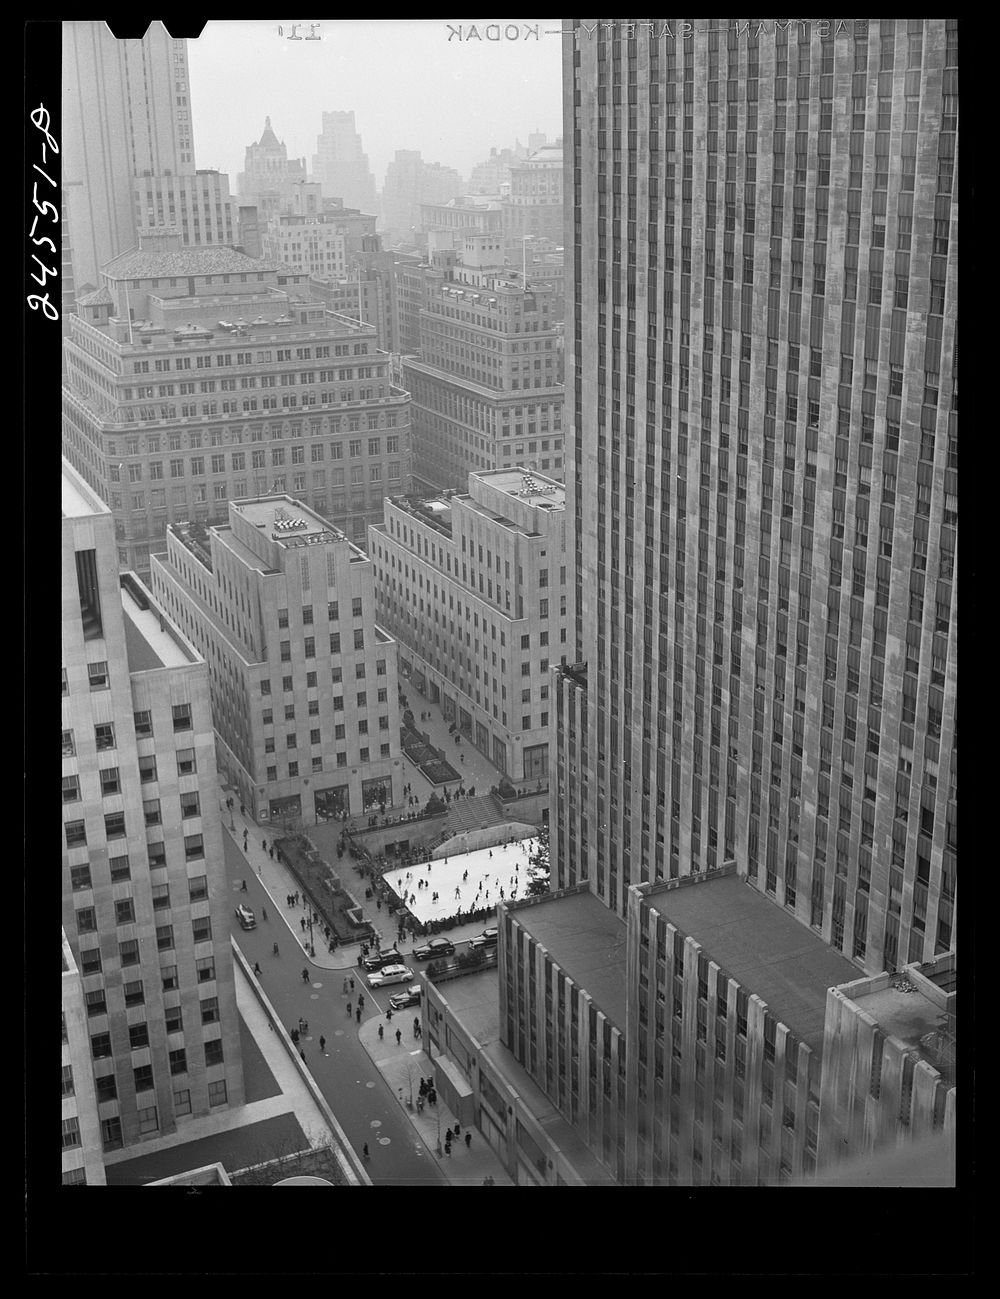 Radio City, New York City (Rockefeller Center). Sourced from the Library of Congress.